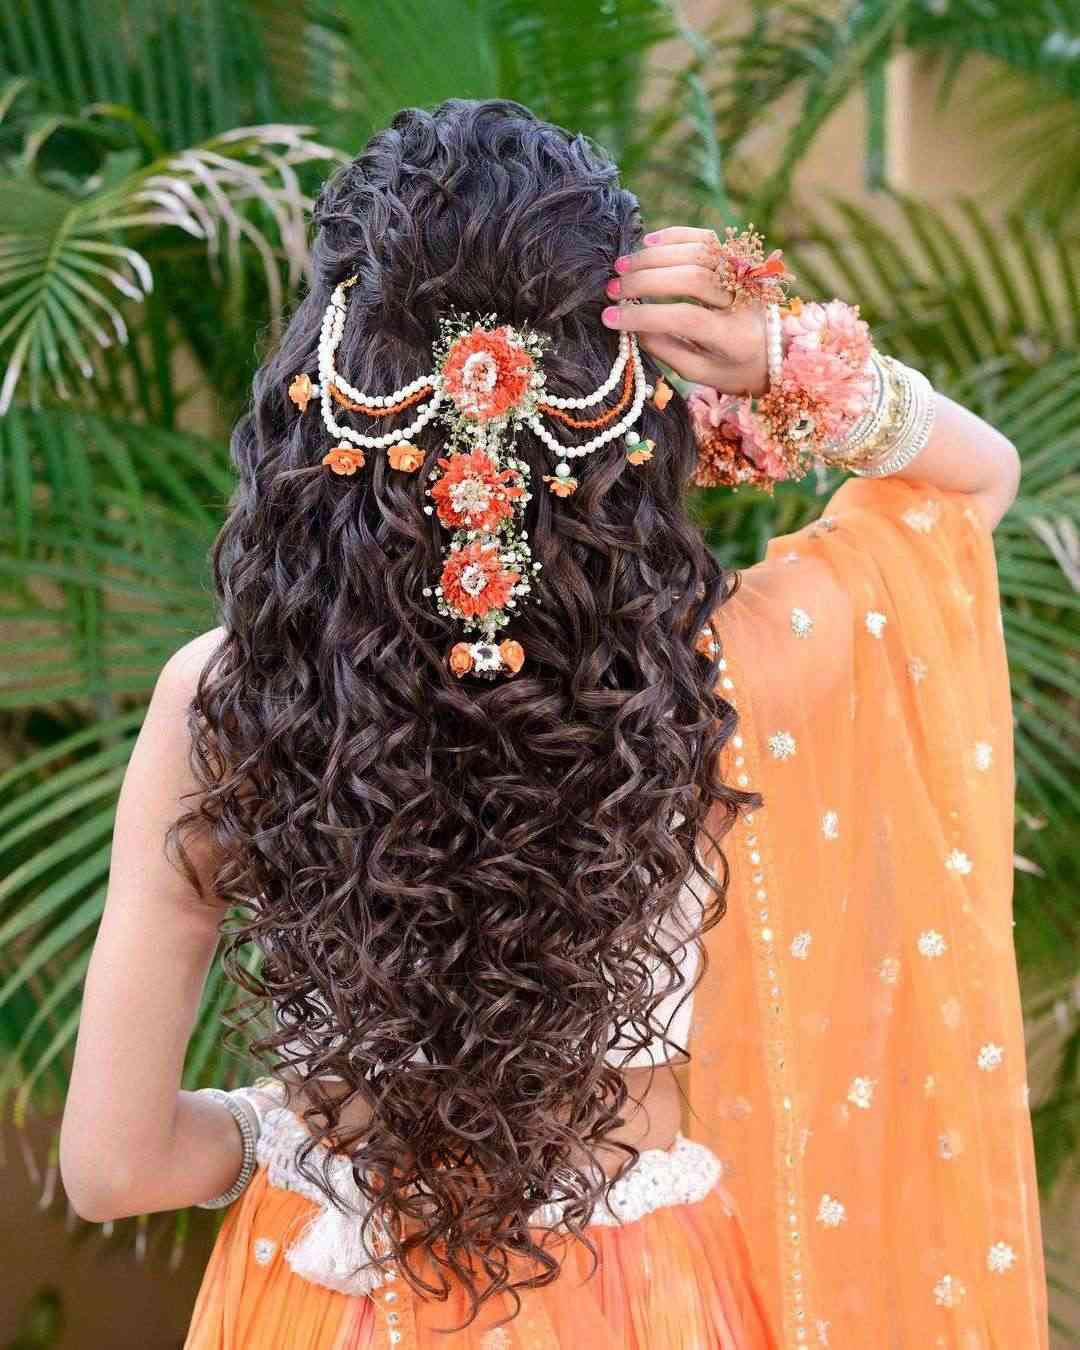 Top Trending Indian Wedding Hairstyles and Tips For Healthy Hair | Femina.in